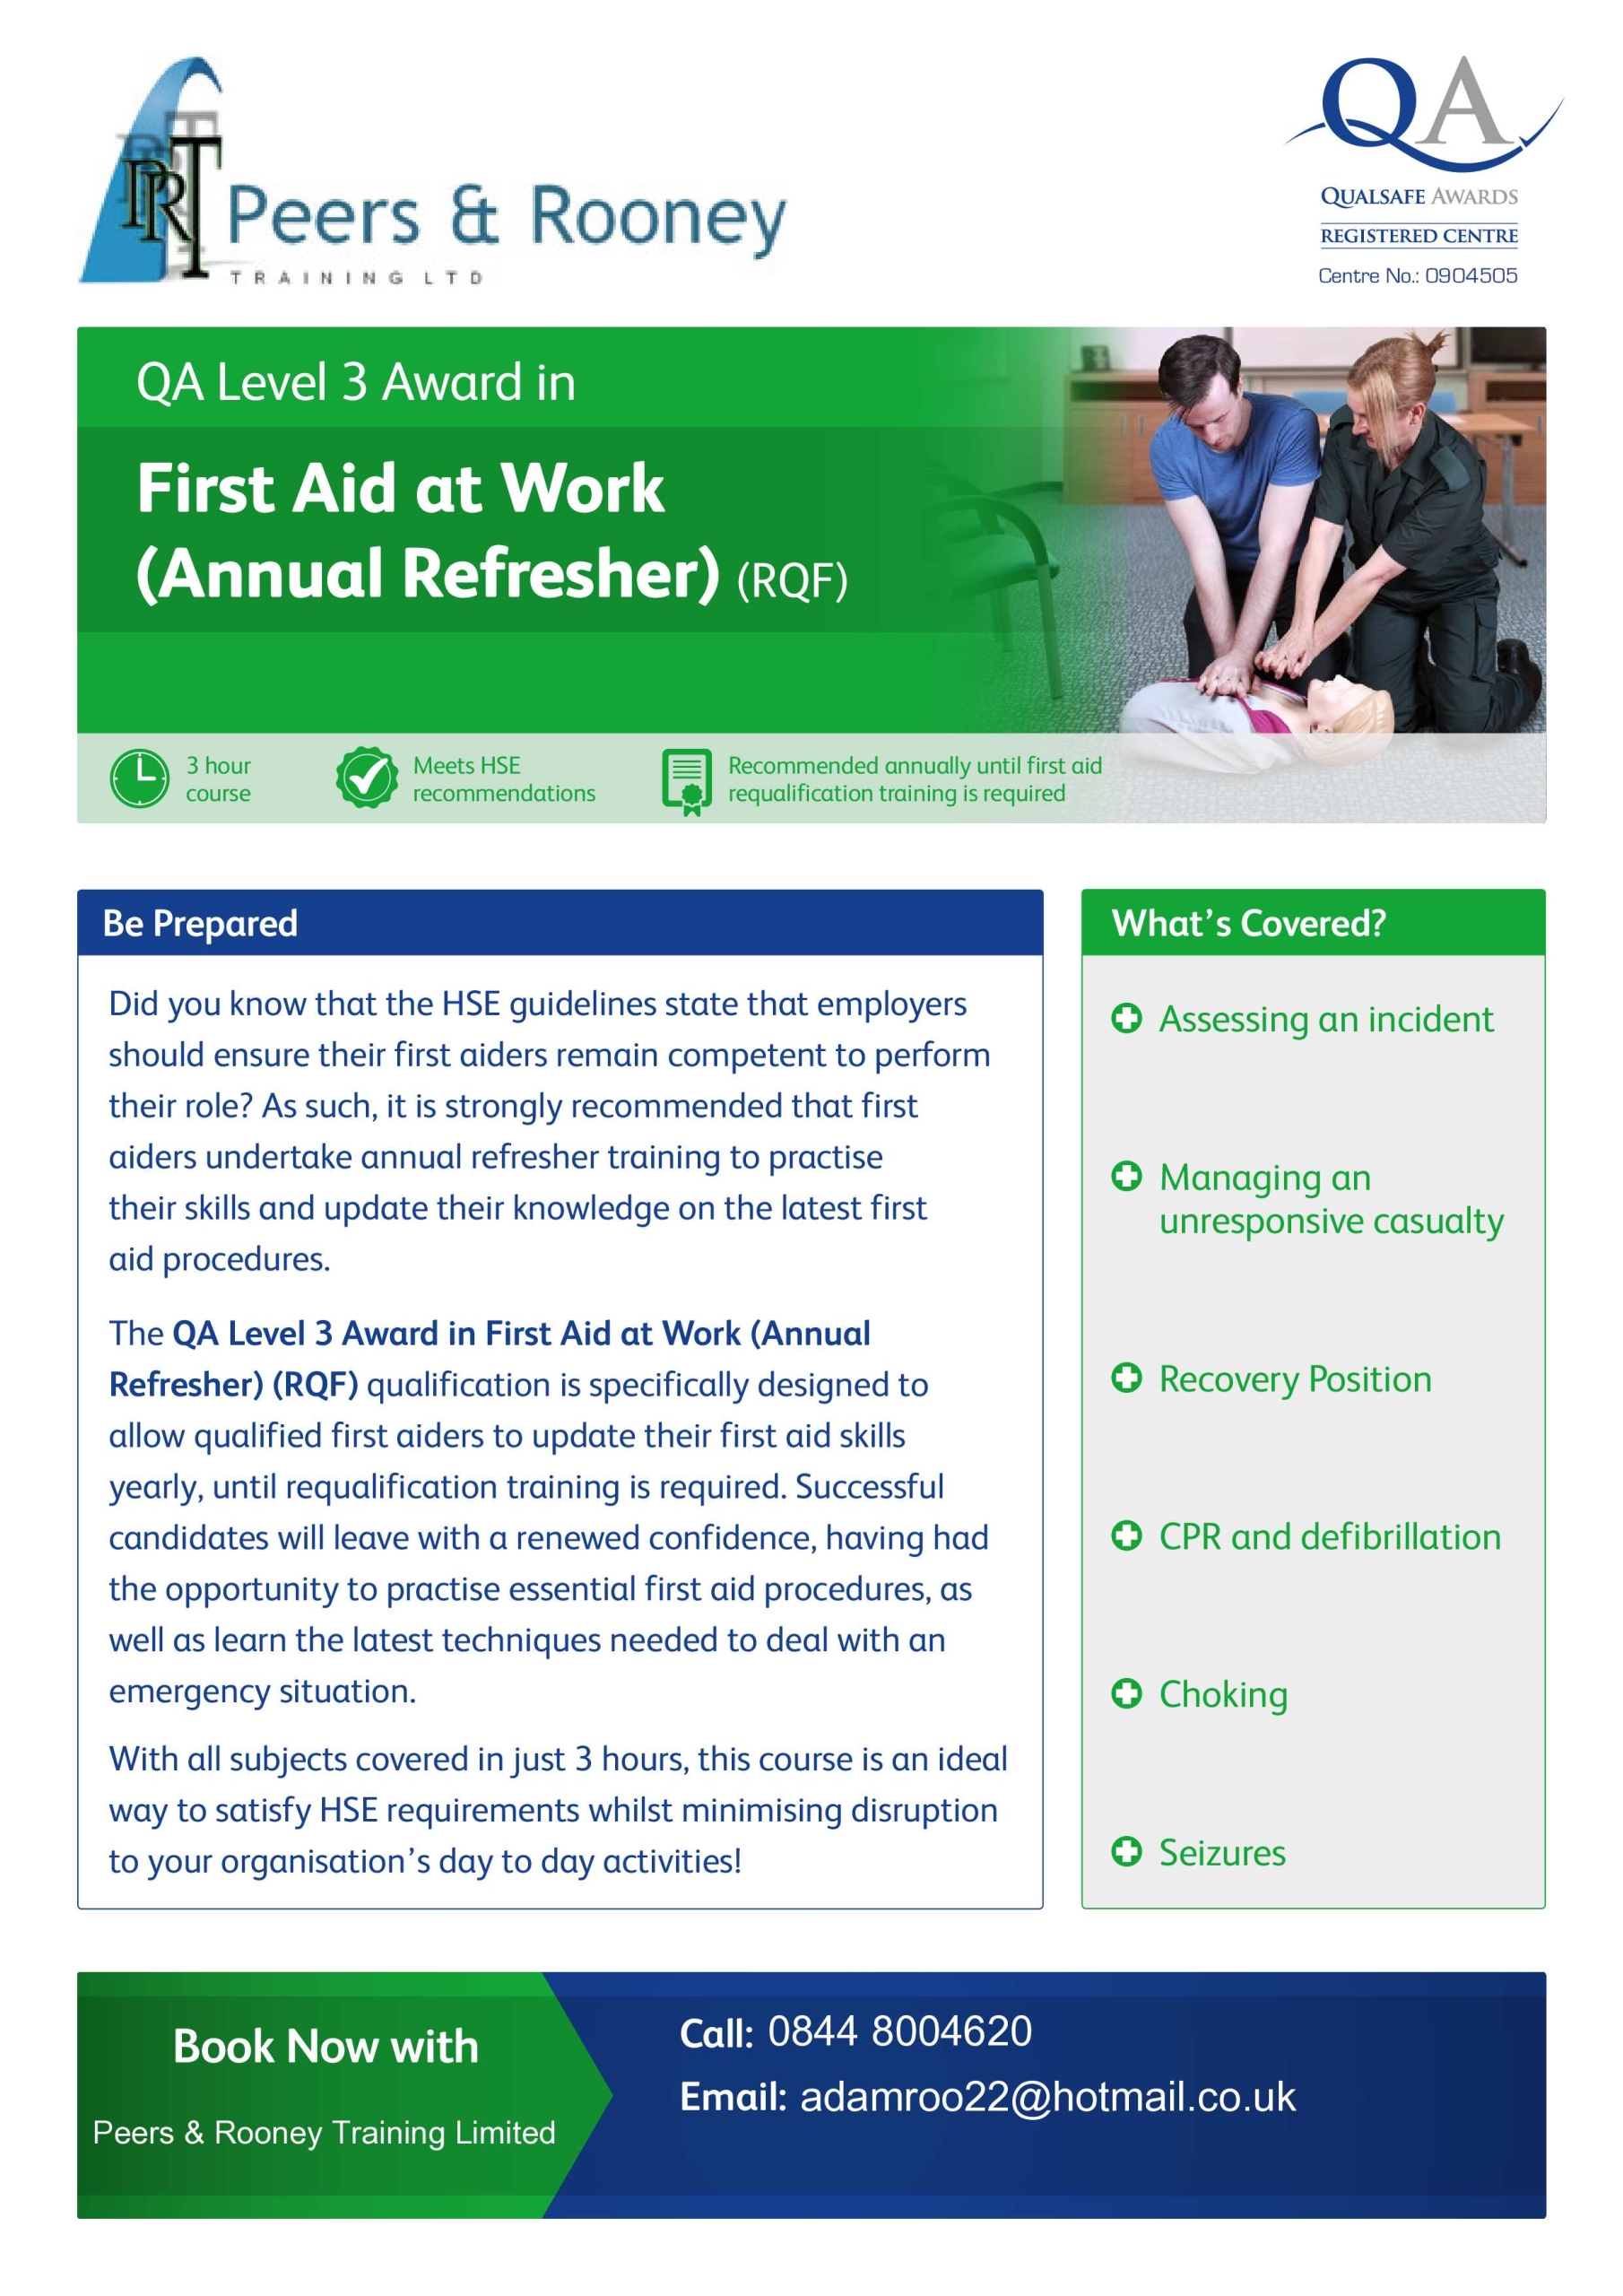 First Aid at Work (Annual Refresher)